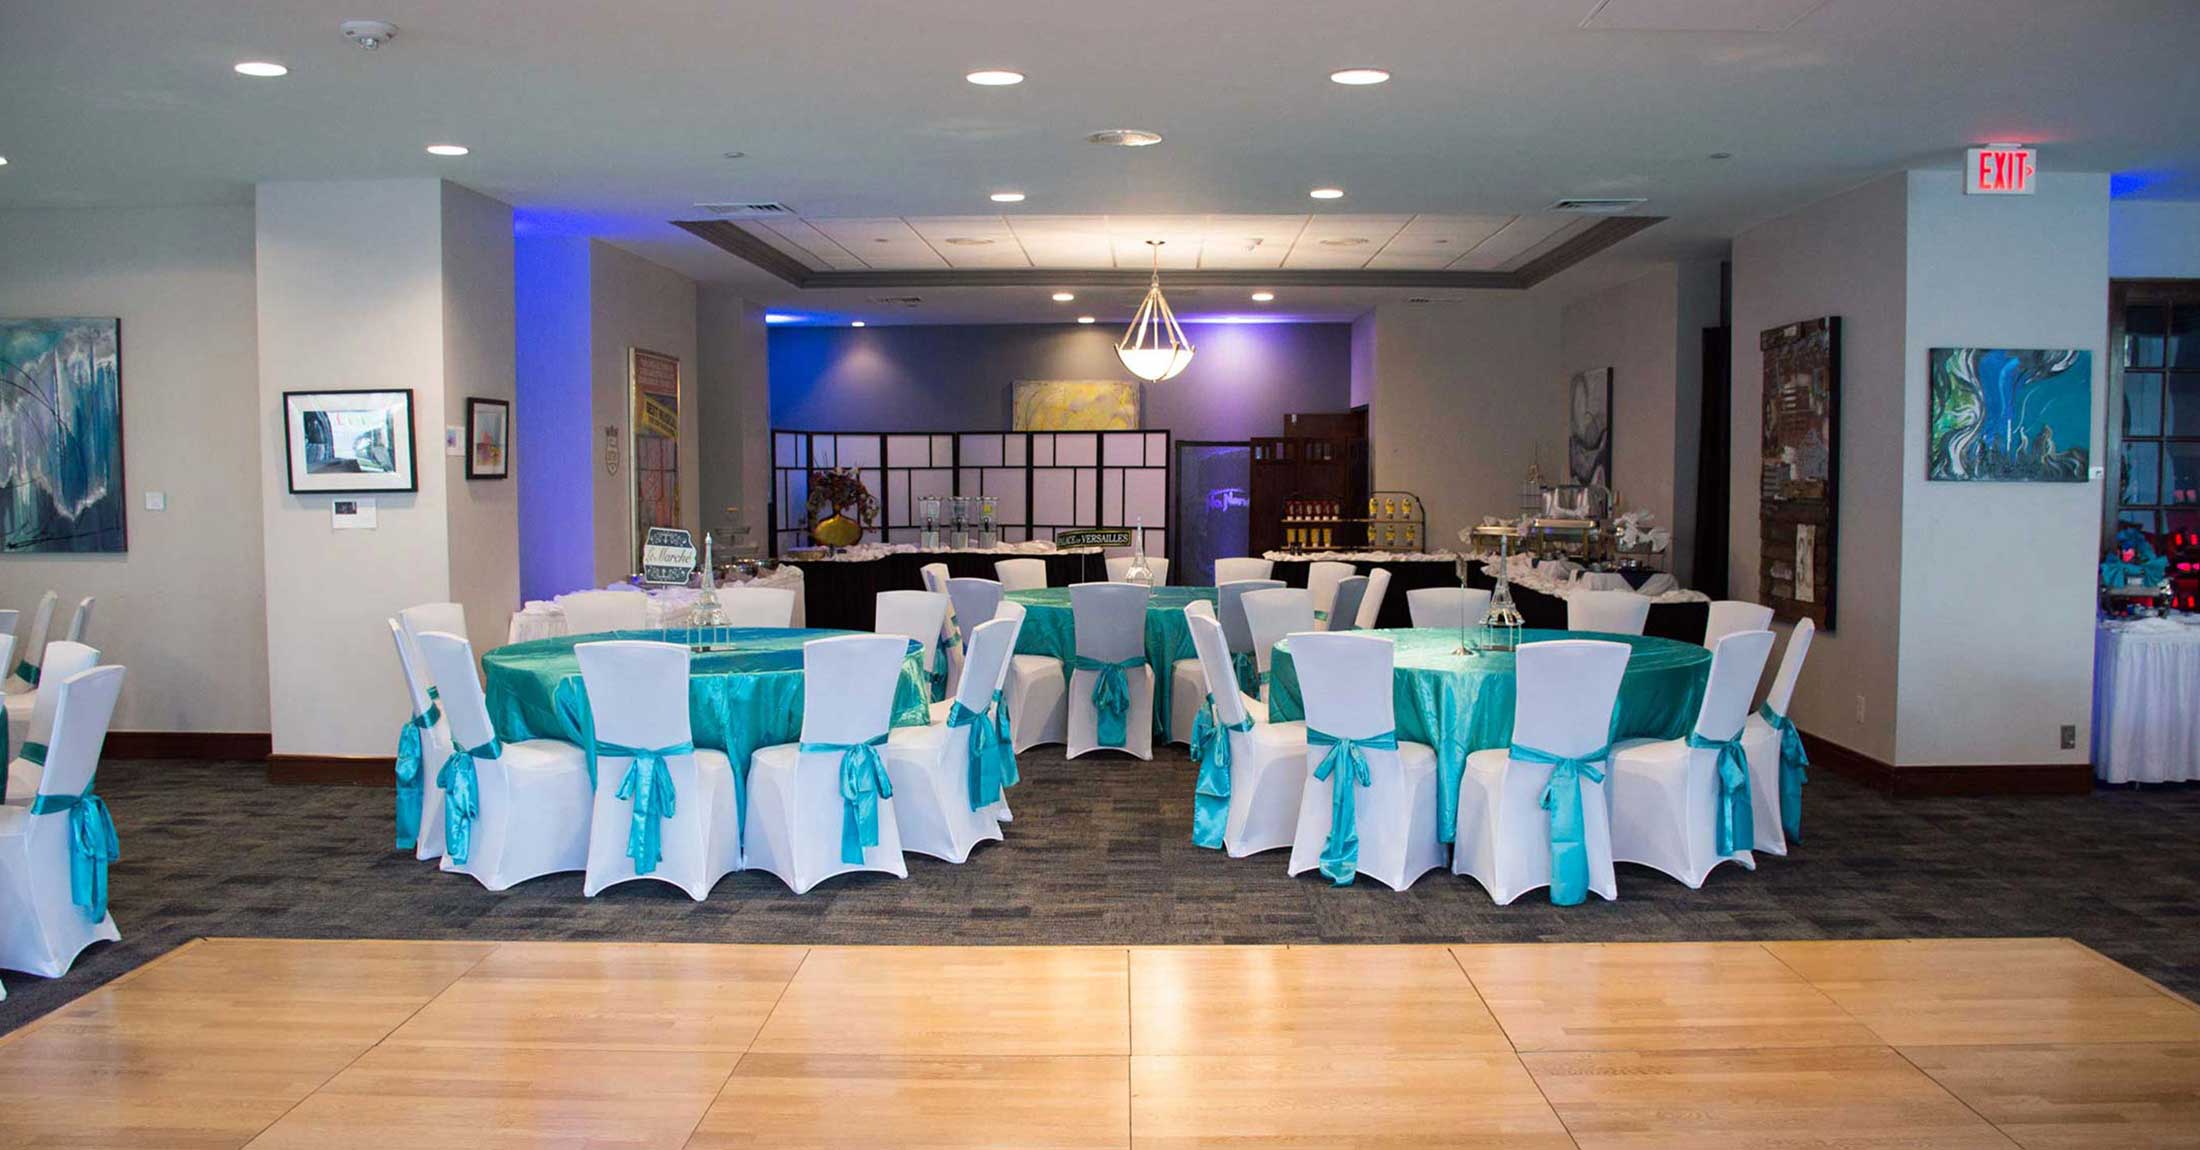 small setup of banquet rounds with with table cloths, white chair covers and teal sashes, dance floor in foreground